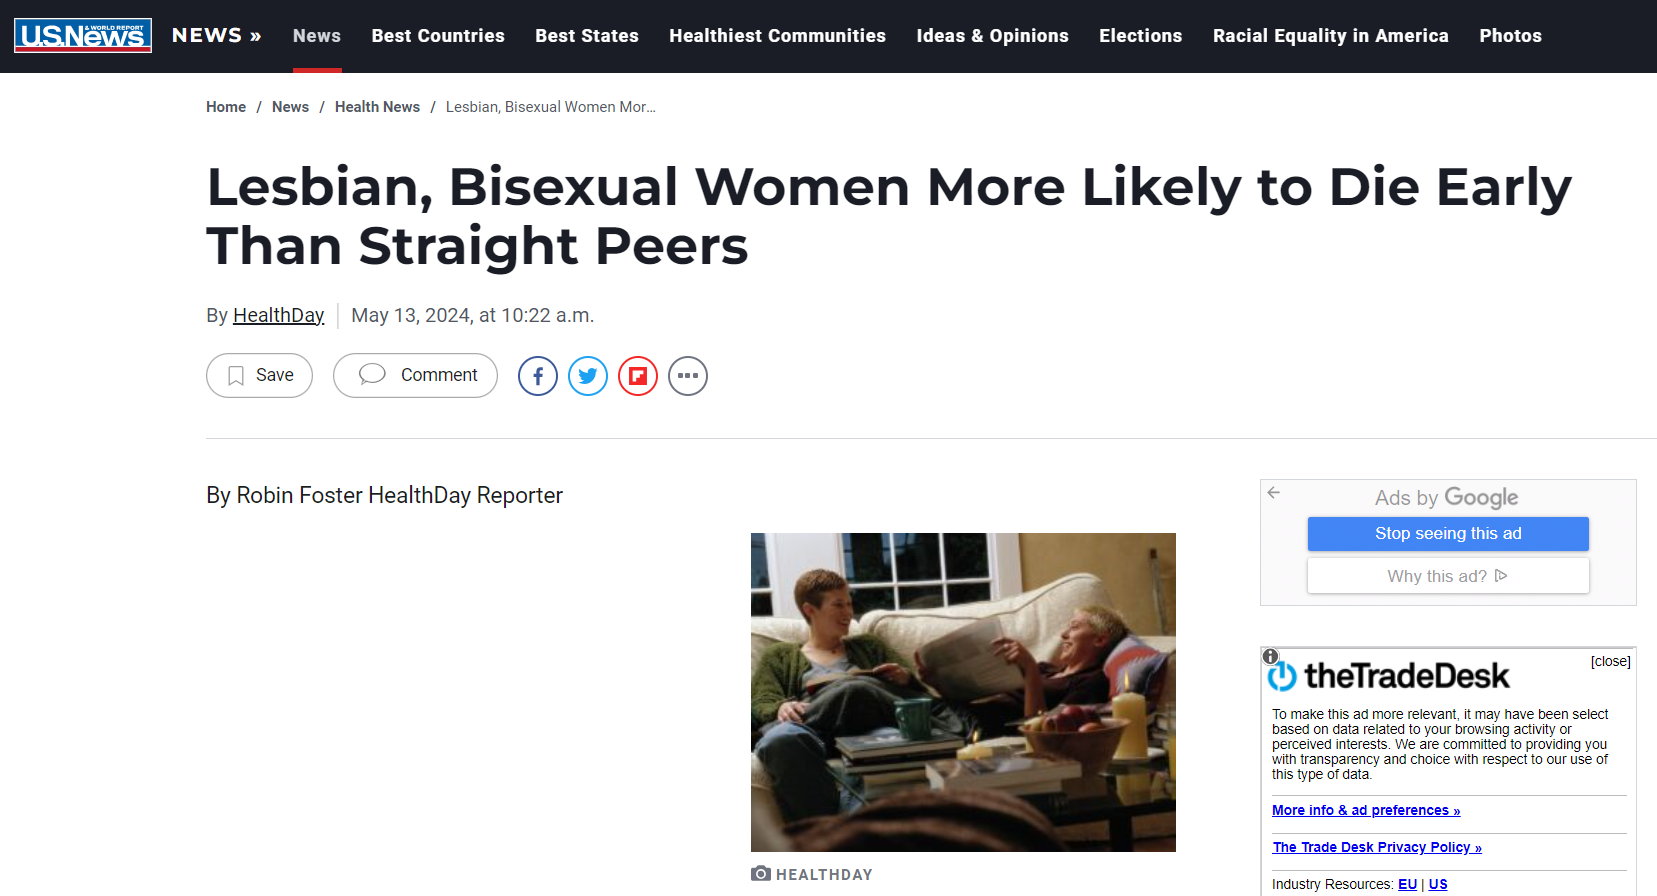 Press Release_US News_Lesbian, bisexual women more likely to die early than straight peers.PNG